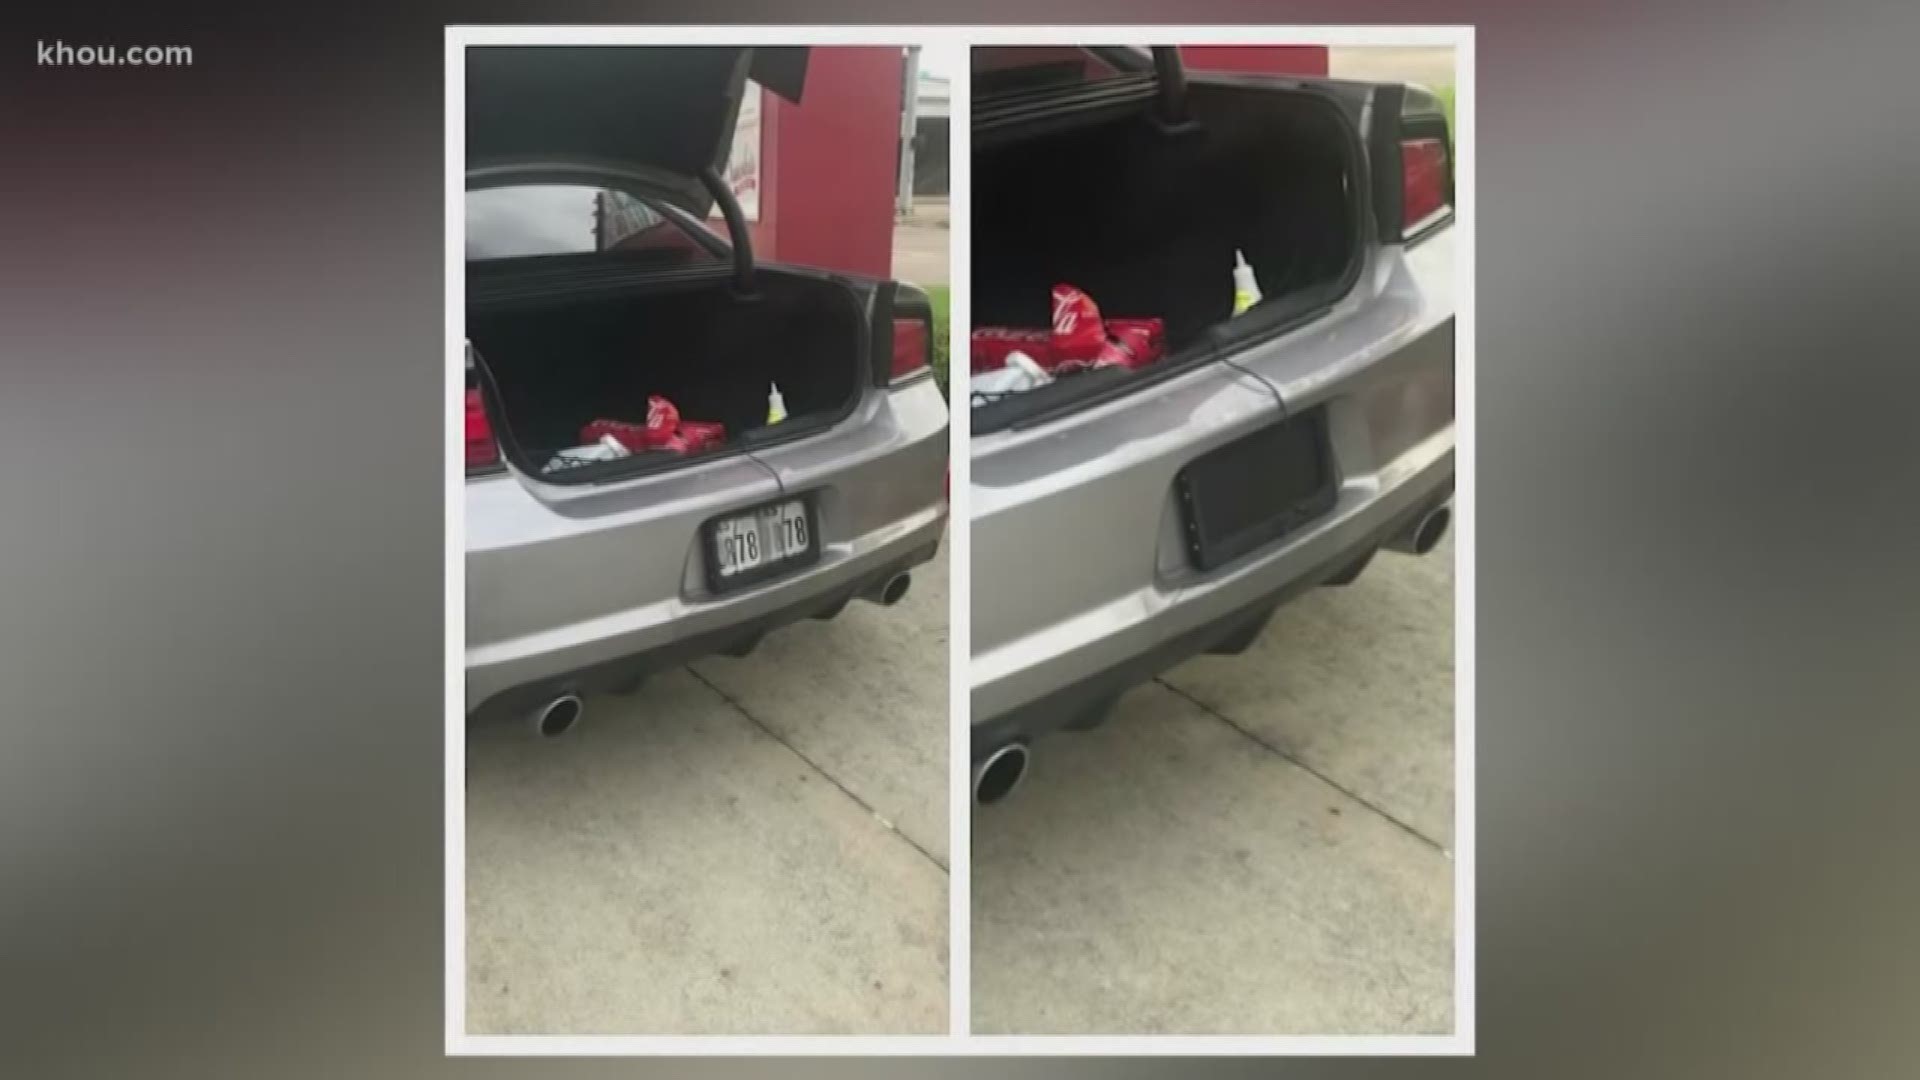 A Houston-area man was arrested after deputy constables say he was avoiding paying tolls by using a device that flips and conceals his license plate.